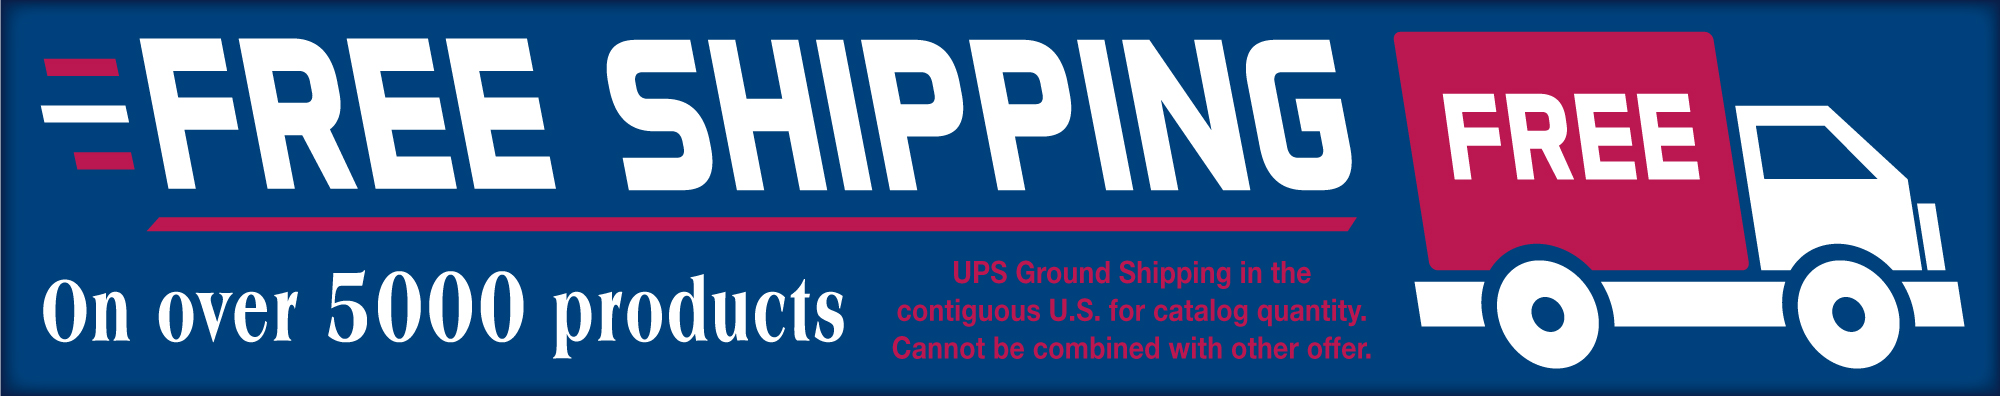 Free Shipping | Learn More About Our Free Promotional Shipping Policy